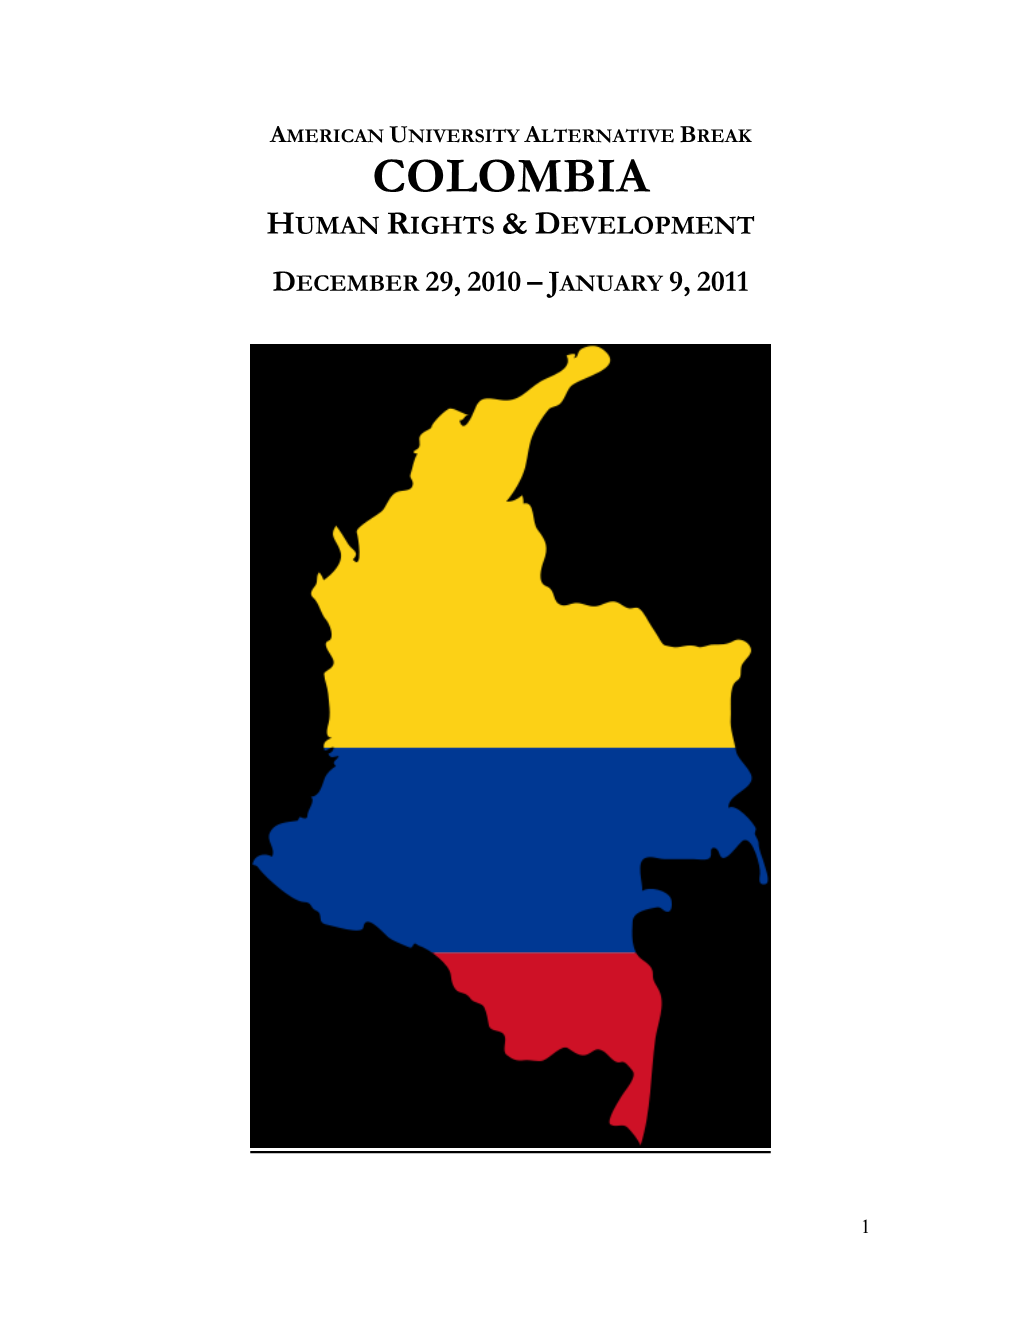 Colombia Human Rights & Development